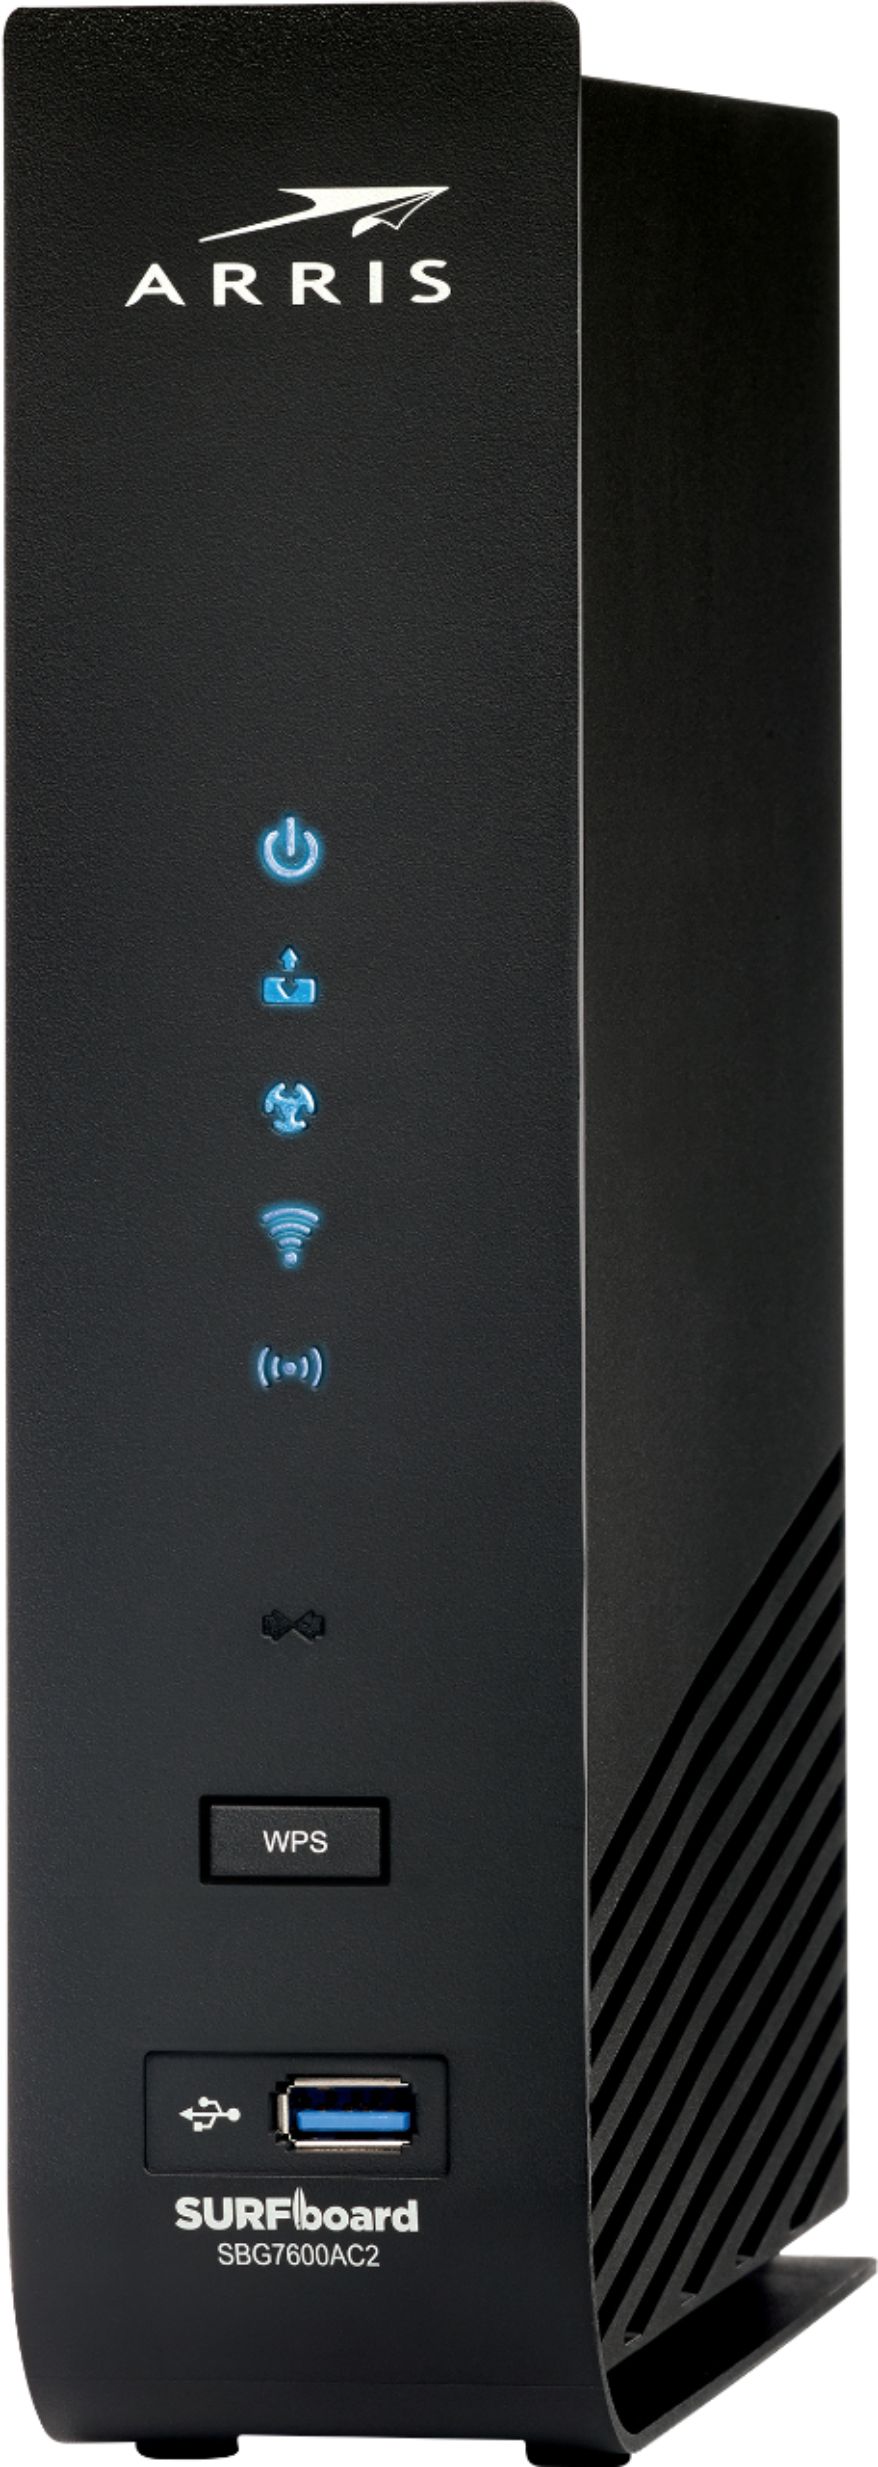 Angle View: ARRIS - SURFboard DOCSIS 3.0 Cable Modem & AC2350 Wi-Fi Router Combo - Black